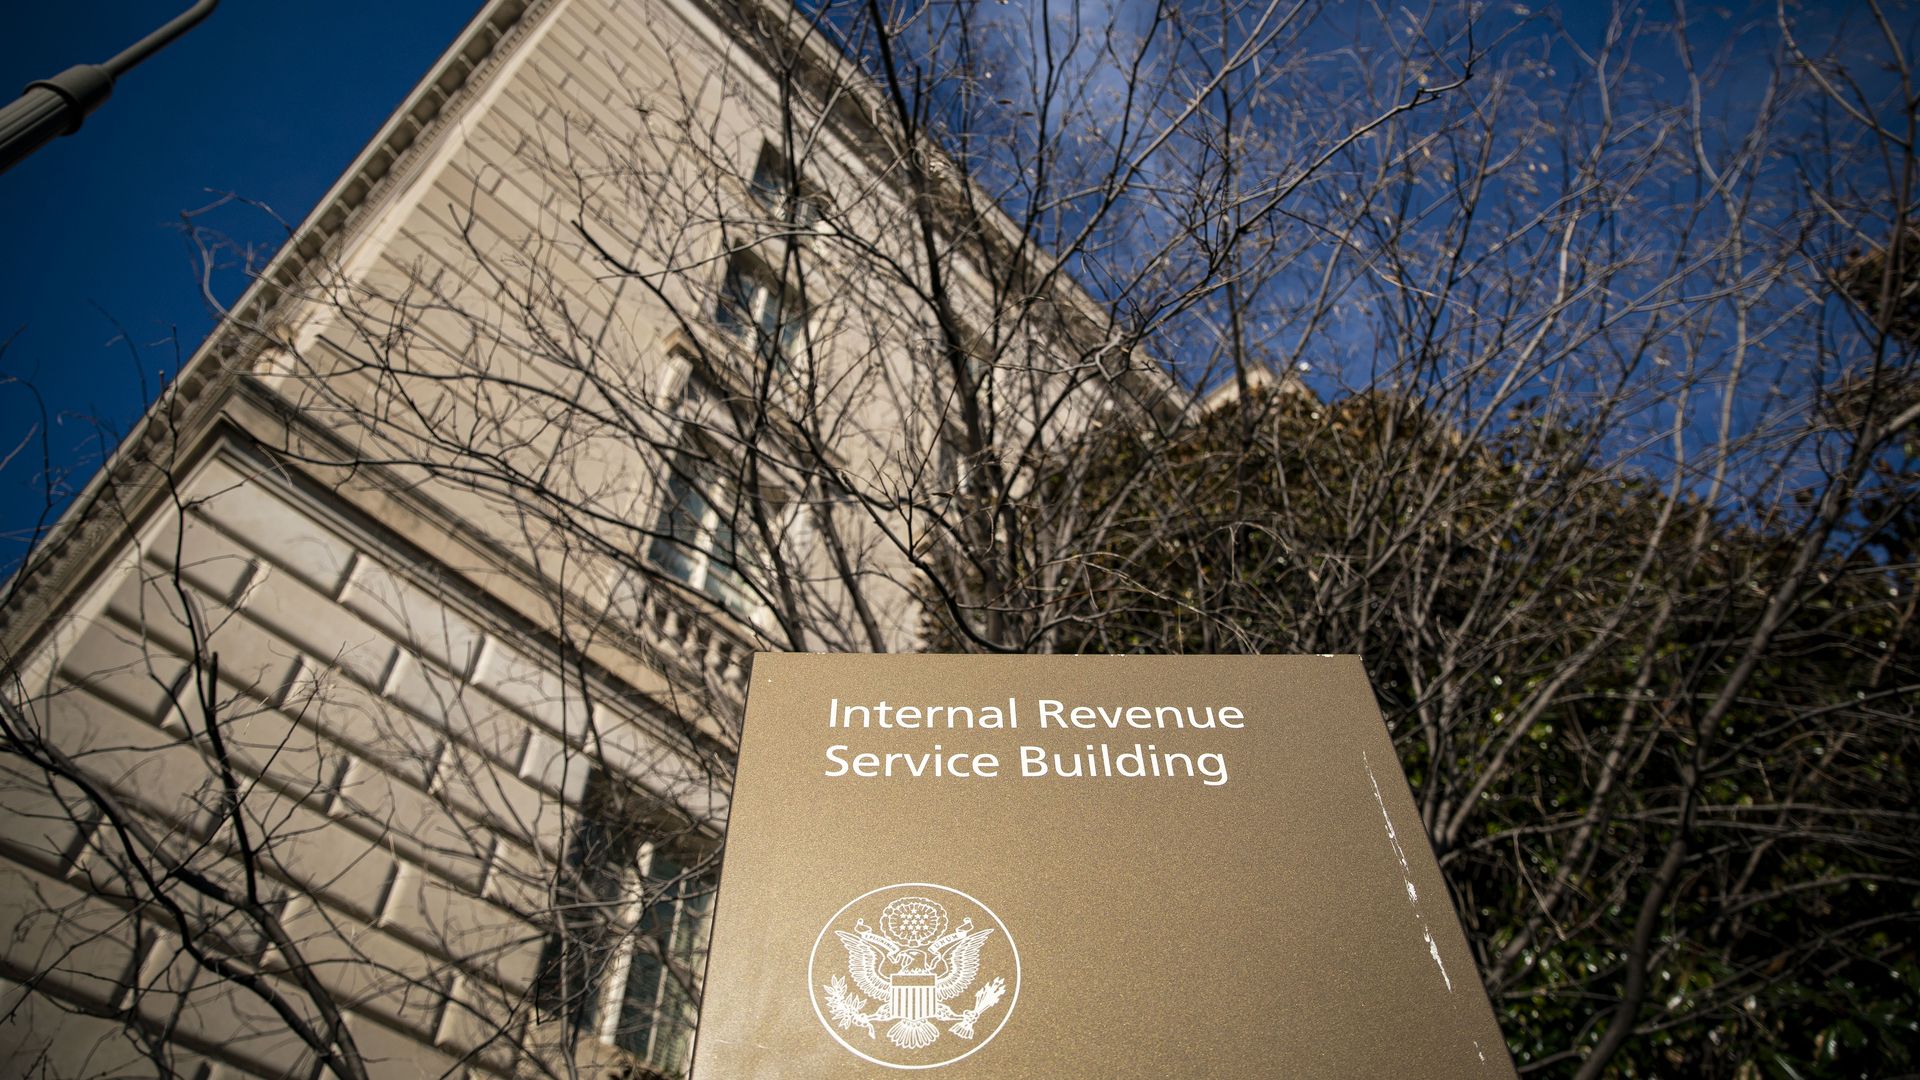 Sign outside building that says Internal Revenue Service Building